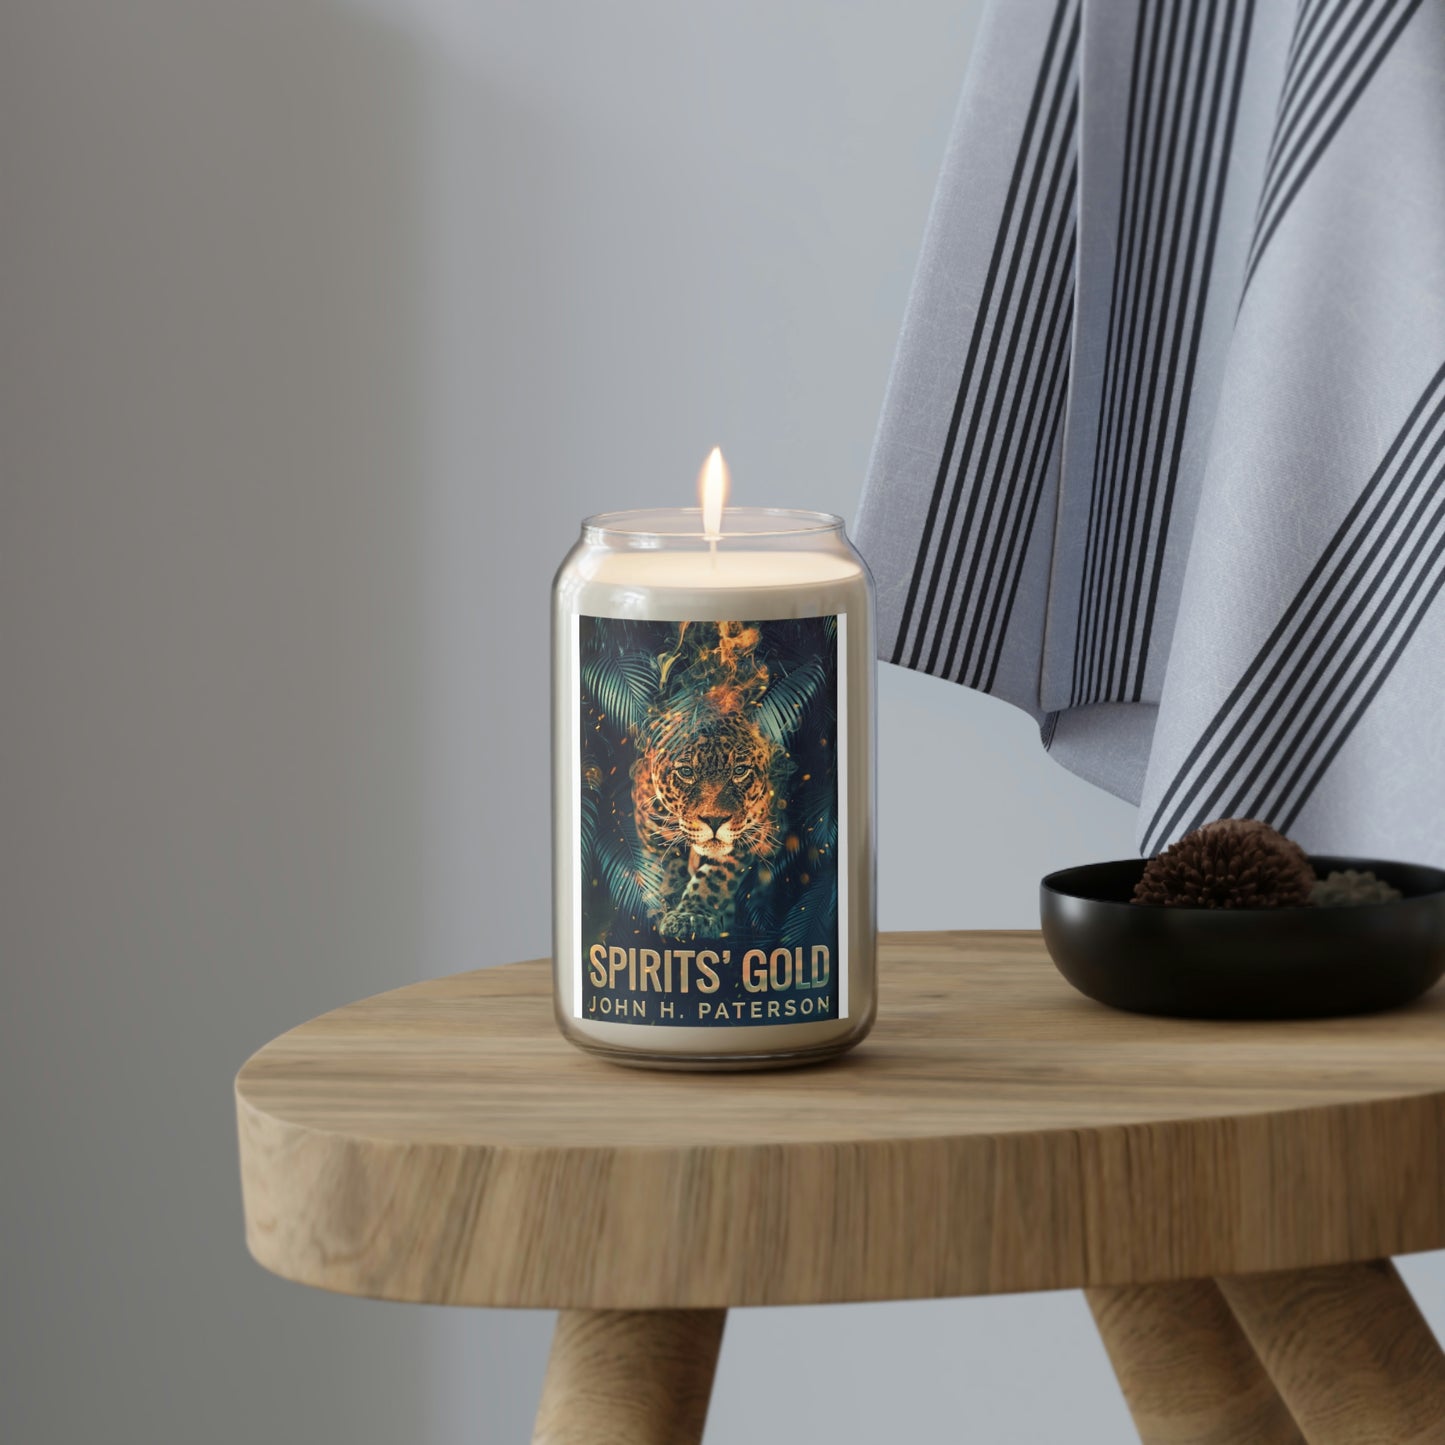 Spirits' Gold - Scented Candle